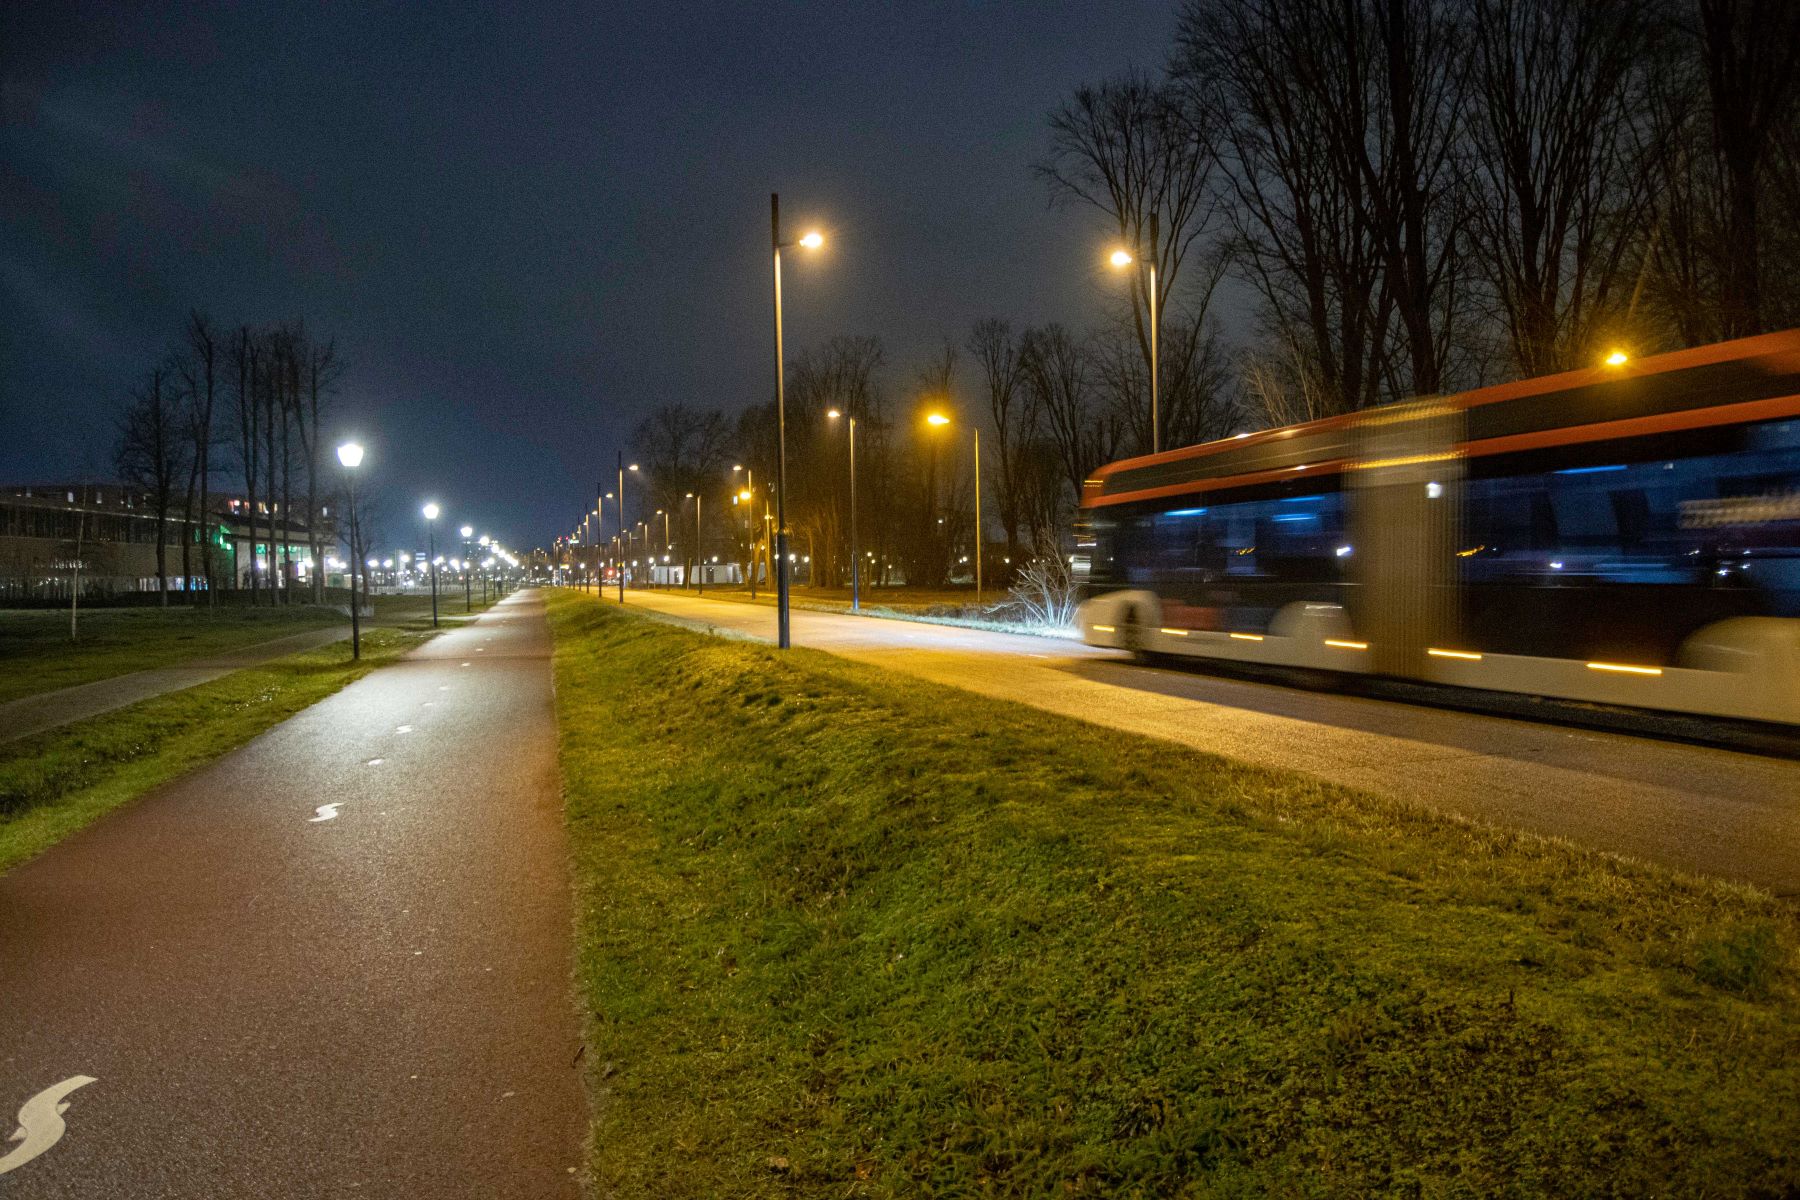 An empty bus driving through the Dutch city of Eindhoven, evoking a car-free city environment